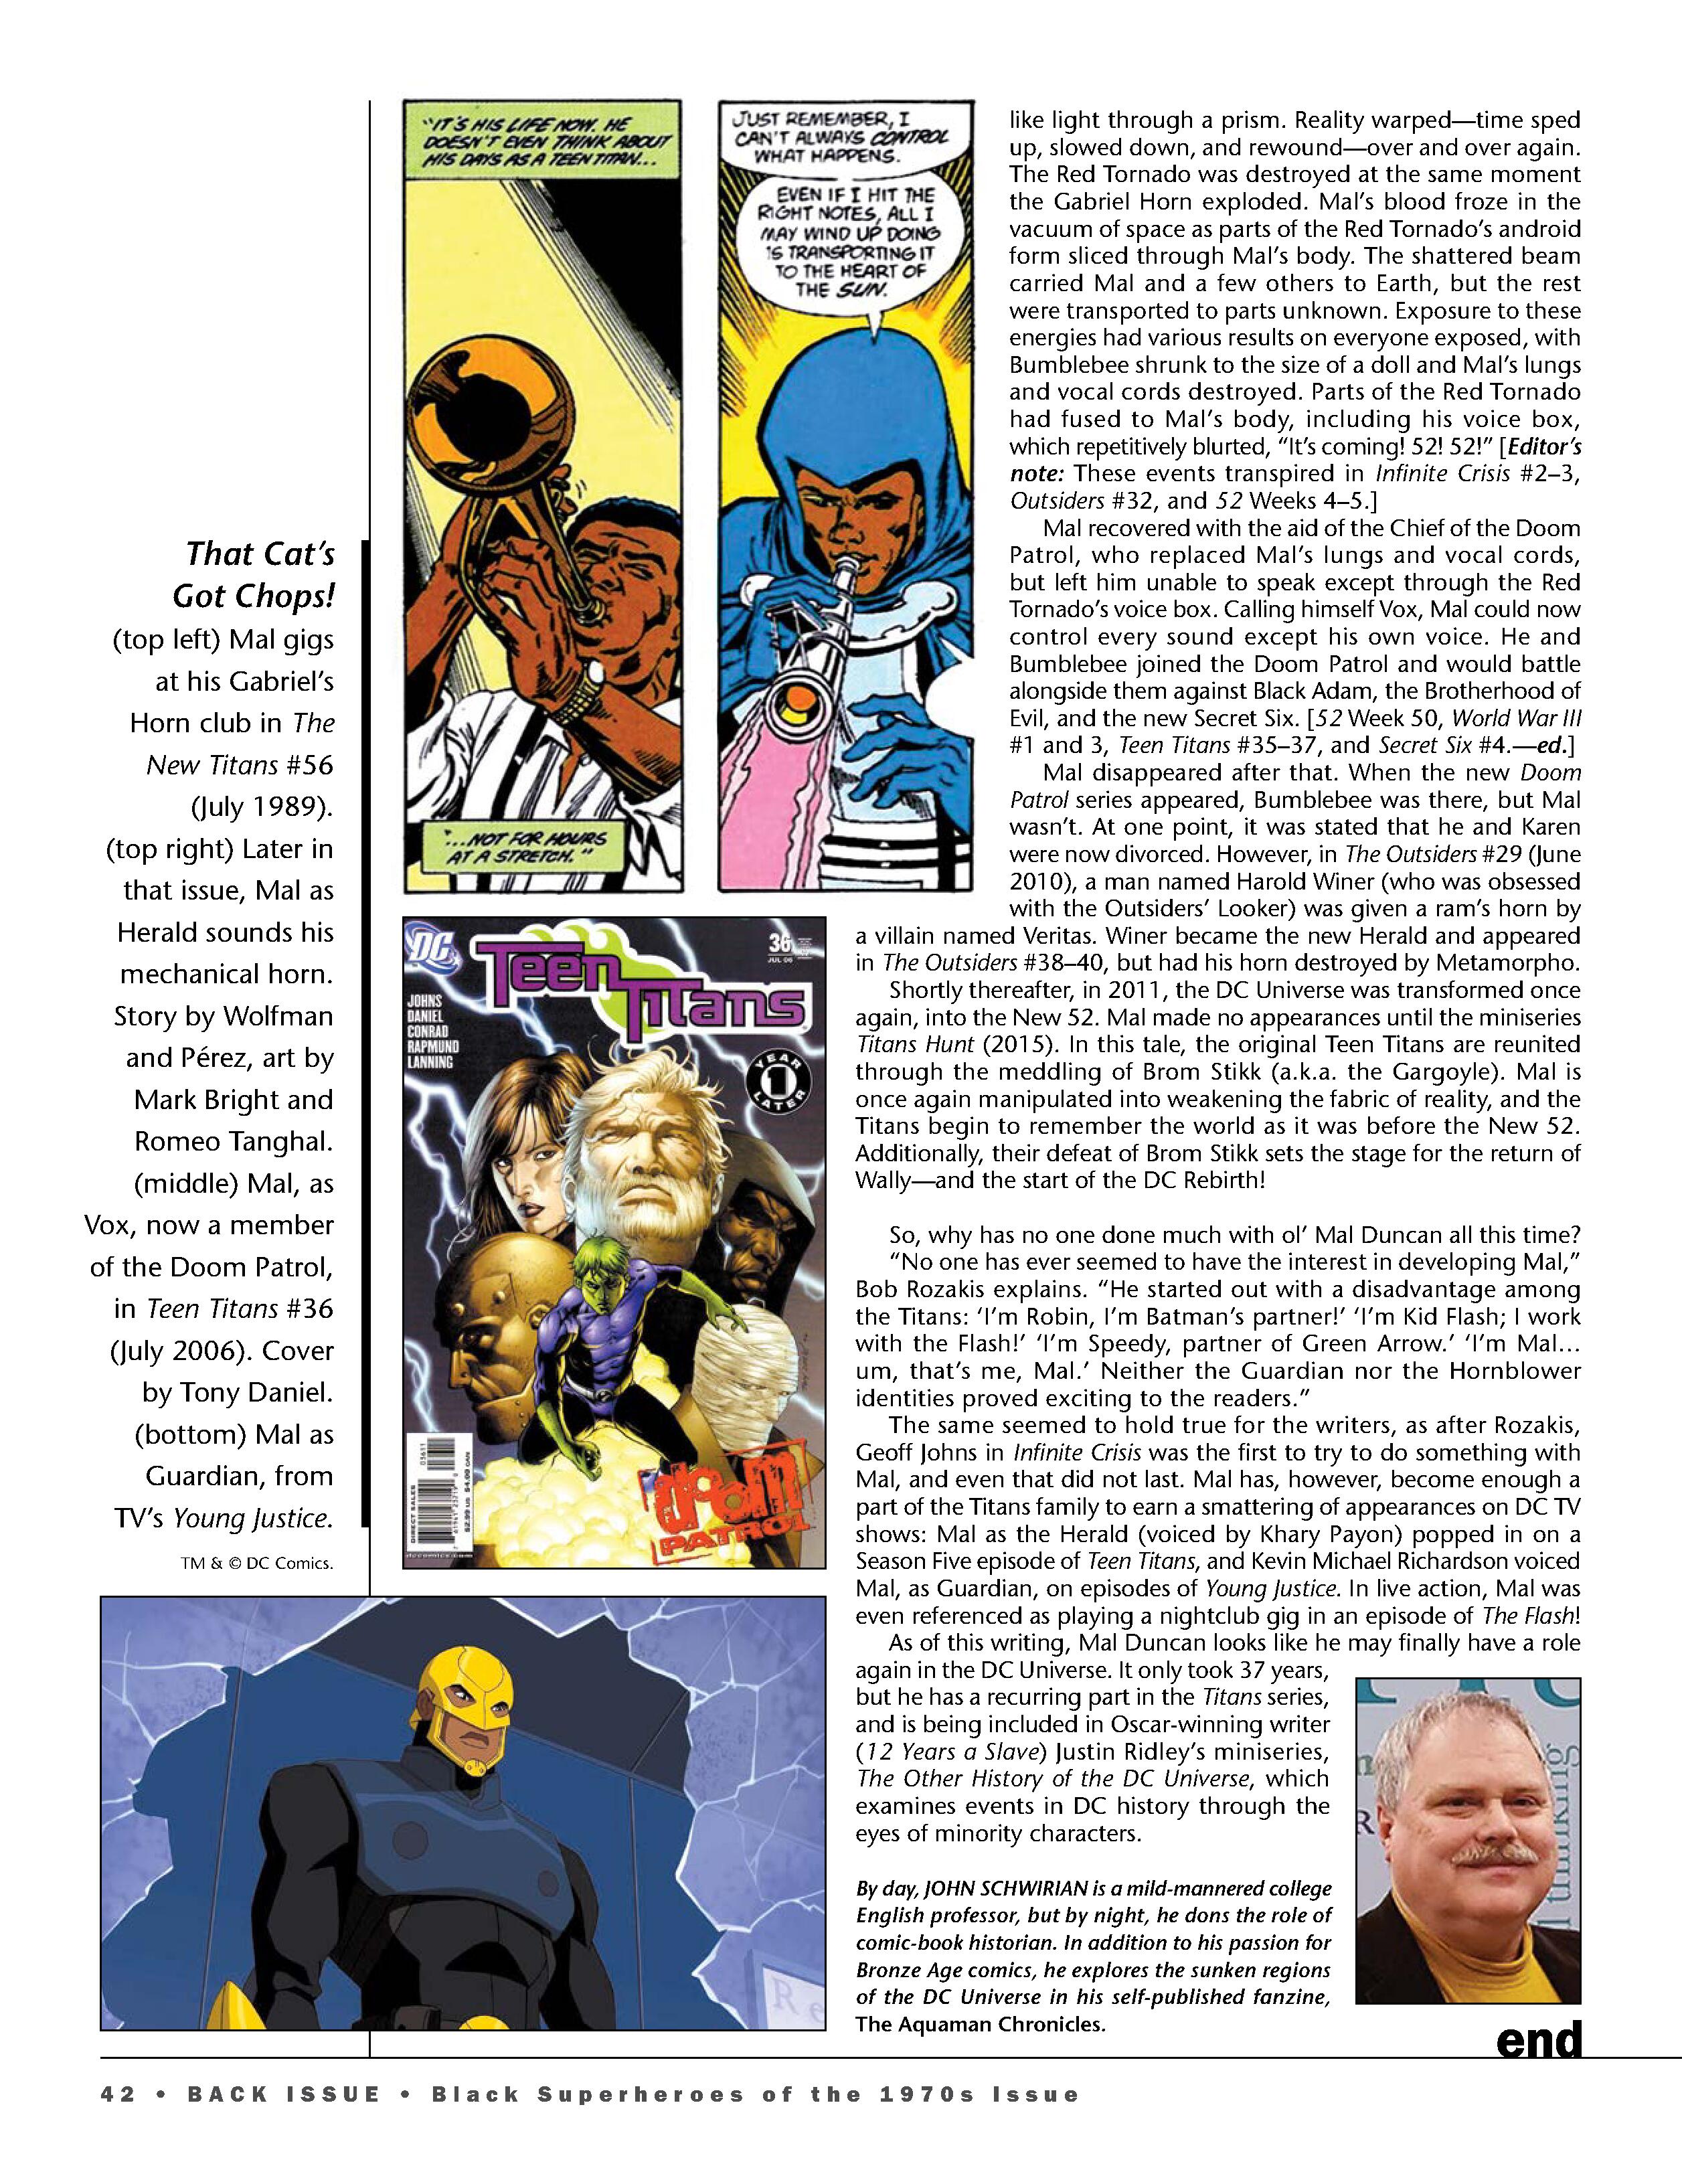 Read online Back Issue comic -  Issue #114 - 44